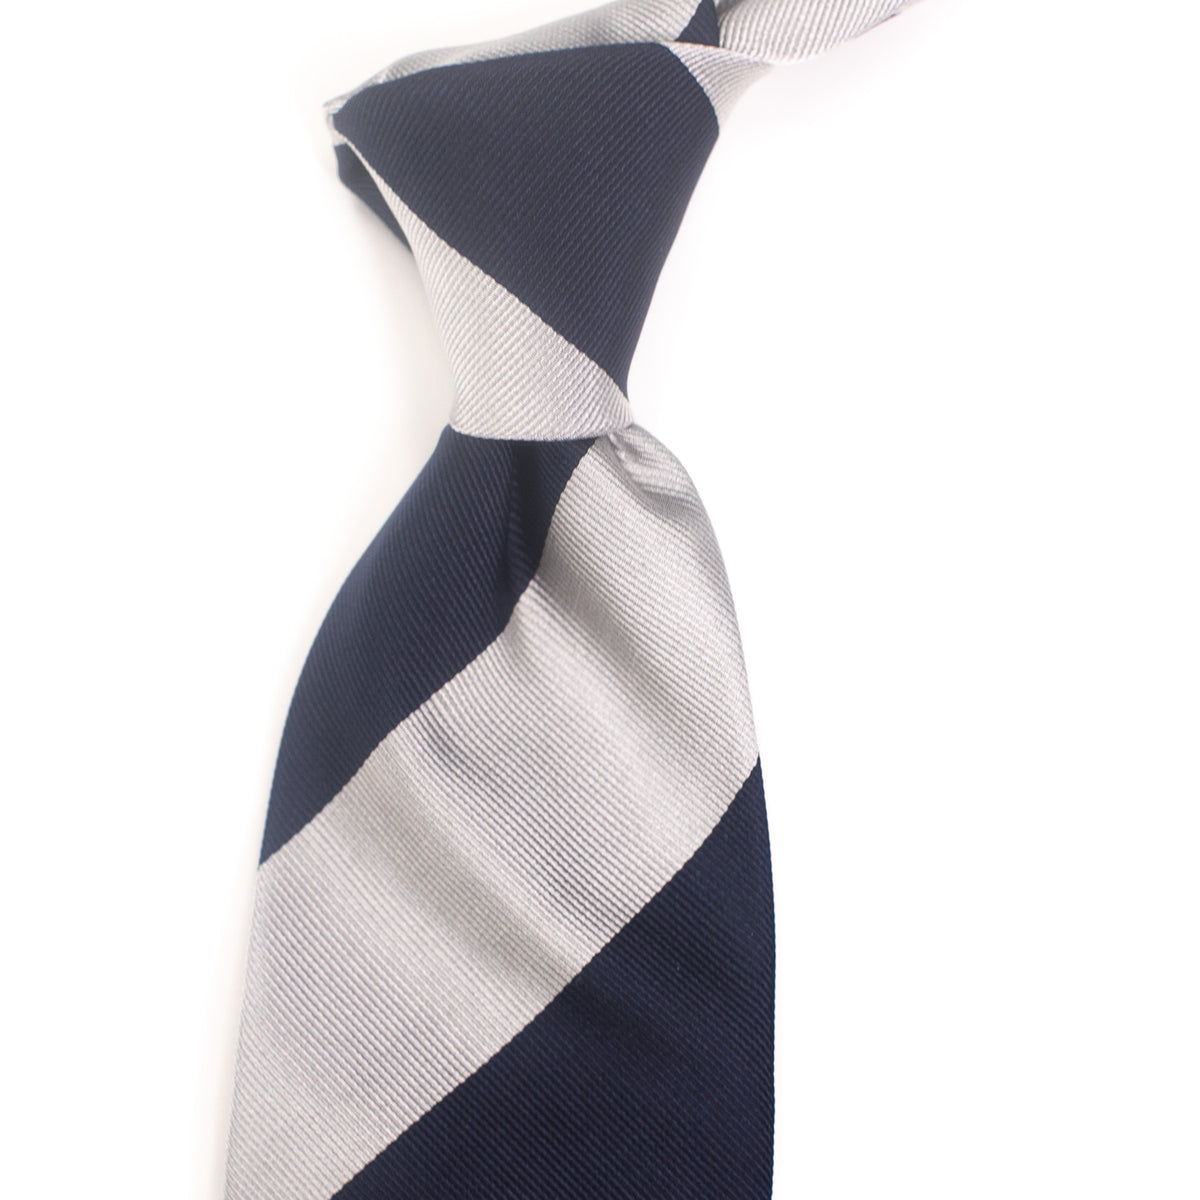 A Sovereign Grade Navy Wide Rep Tie, 150 cm by KirbyAllison.com.